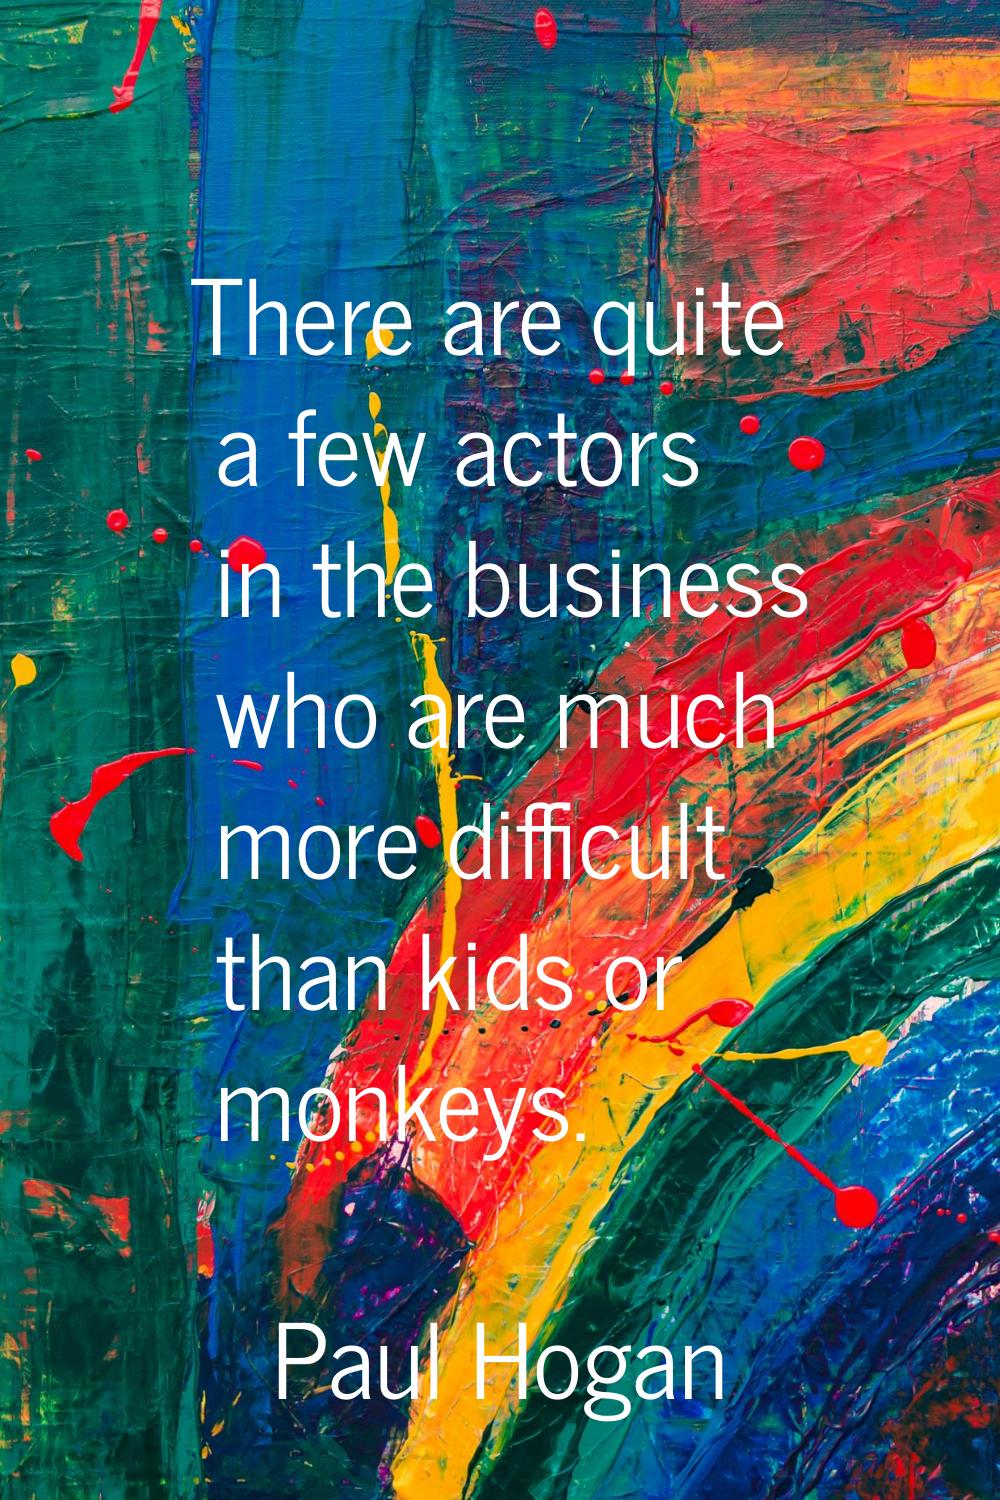 There are quite a few actors in the business who are much more difficult than kids or monkeys.